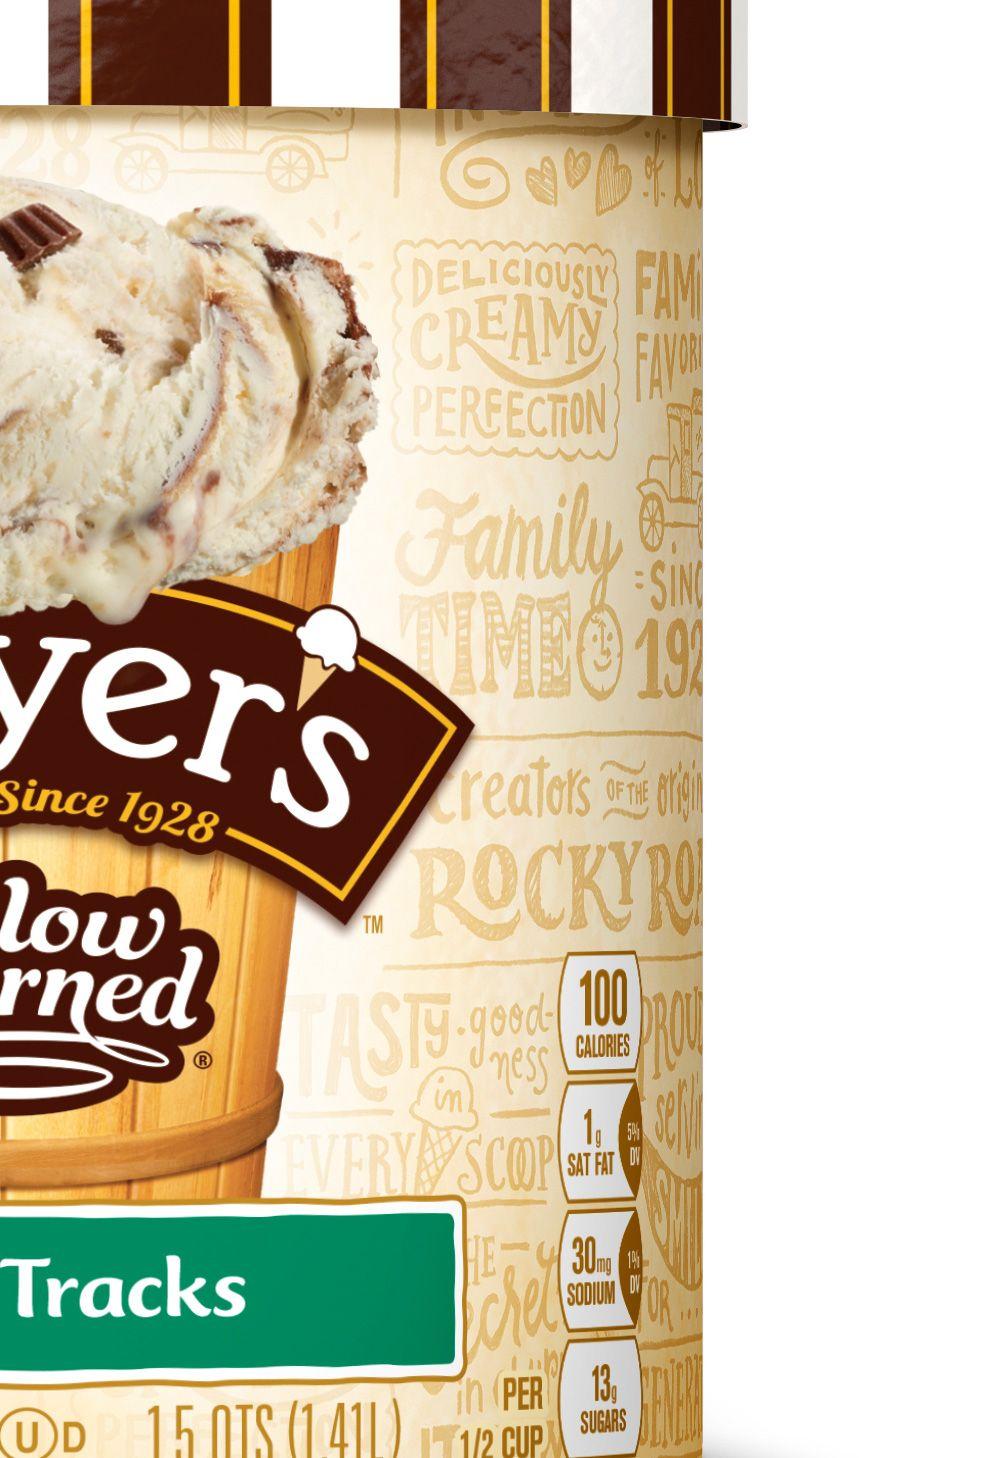 Dreyer's Logo - Brand New: New Logos and Packaging for Dreyer's and Edy's Ice Cream ...